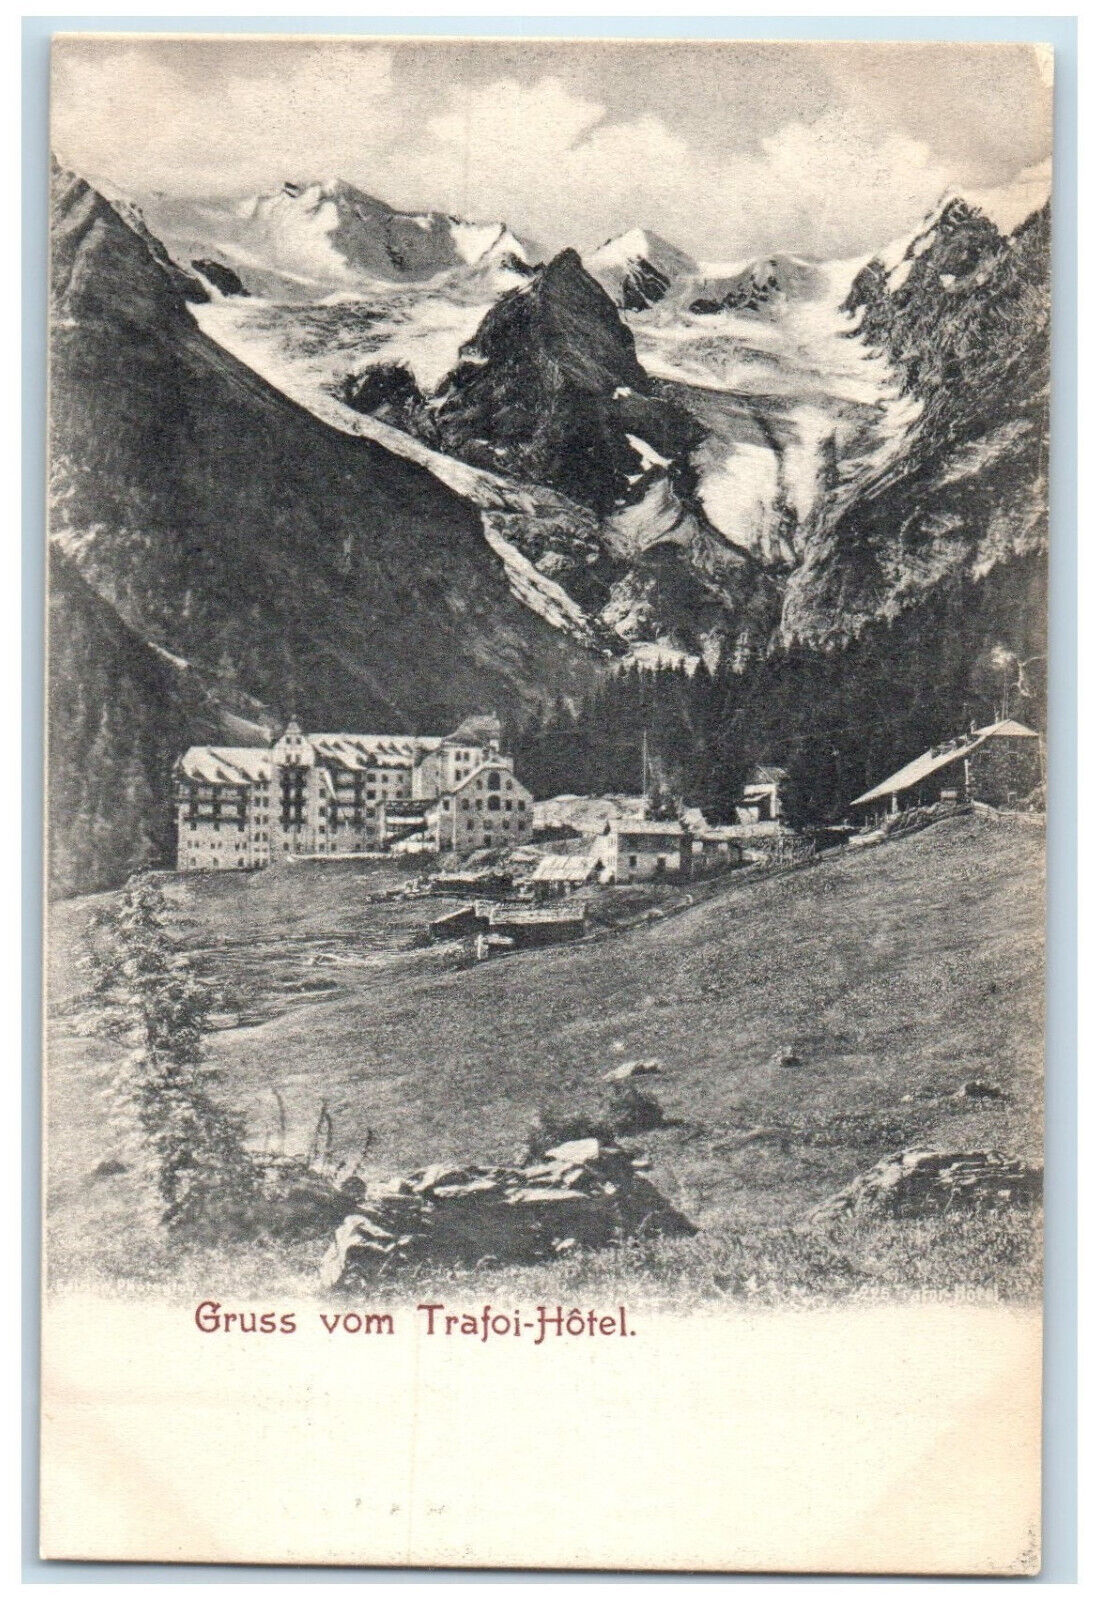 c1905 View of Mountain House Greetings from Trafoi Hotel Tyrol Austria Postcard